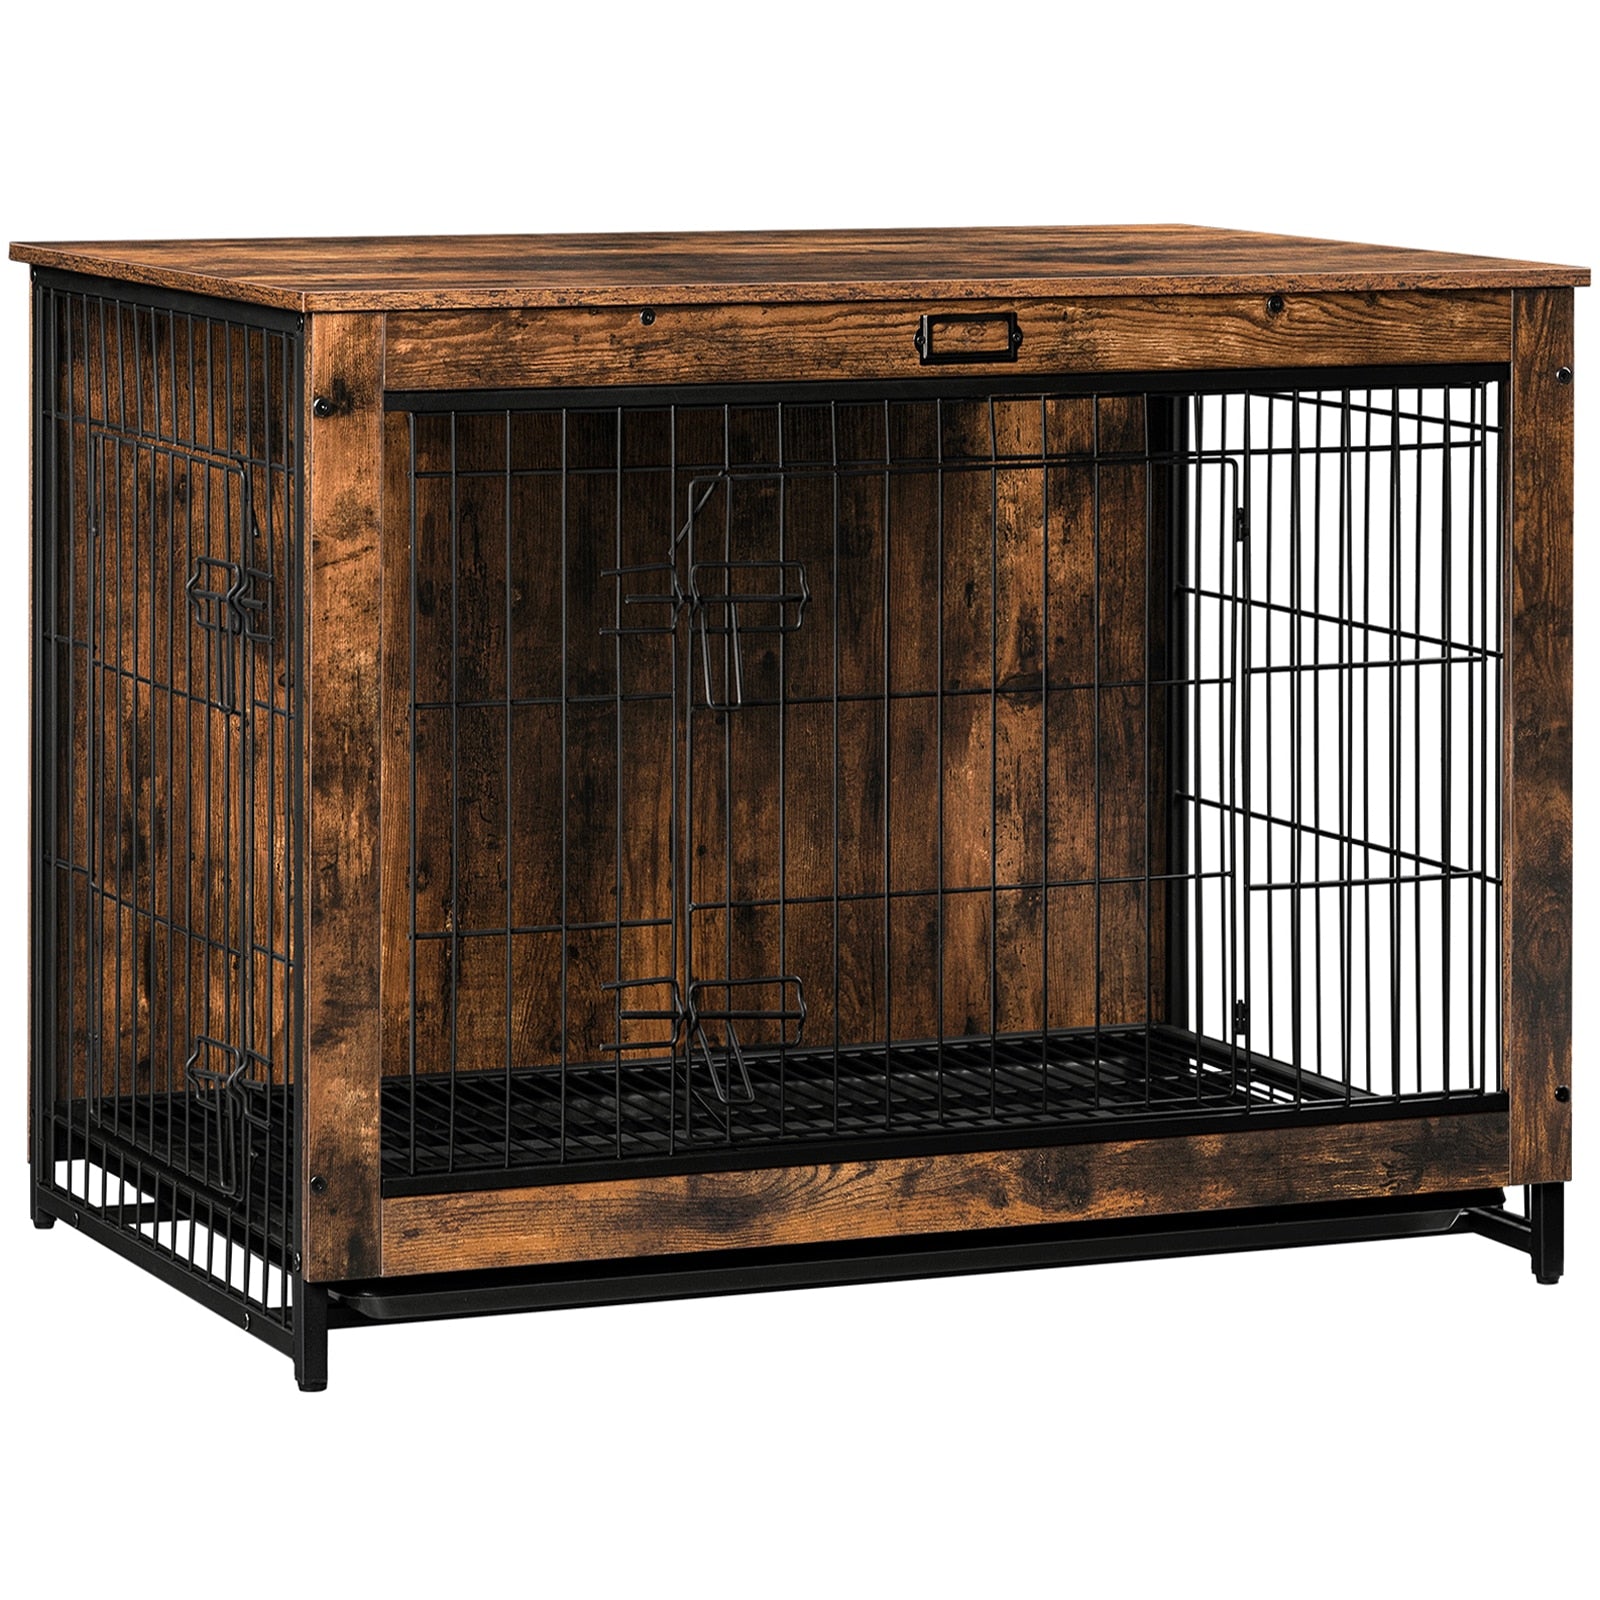 HOOBRO Dog Crate Furniture Large Dog Kennel Wooden Pet Furniture with Pull-Out Tray Double Doors For Home and Indoor Dog Use